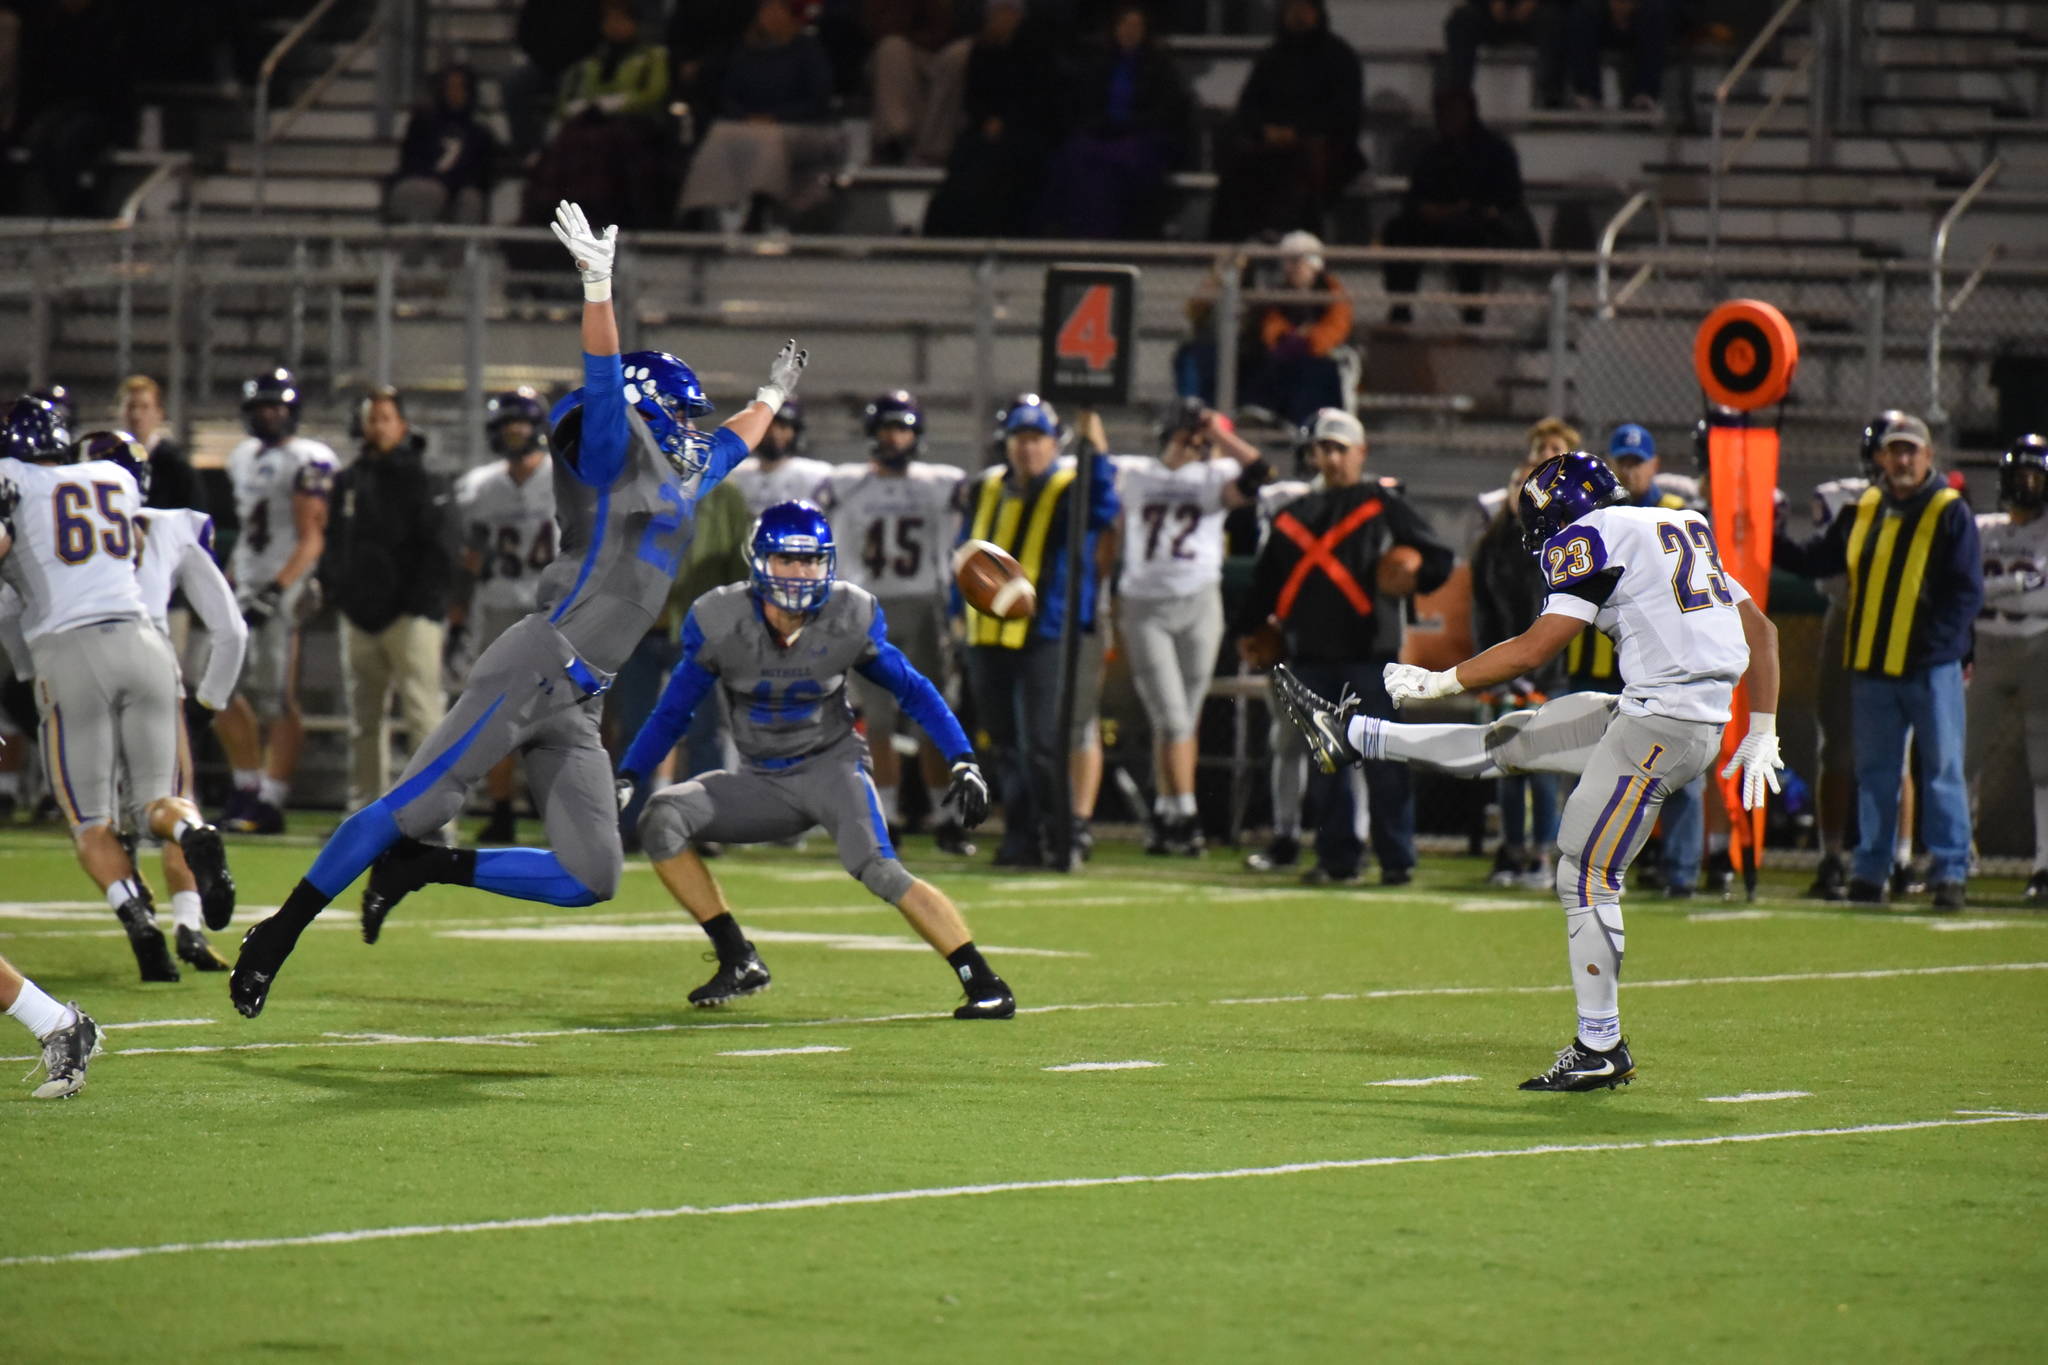 A Bothell player blocks an Issaquah field-goal attempt. Courtesy of Greg Nelson